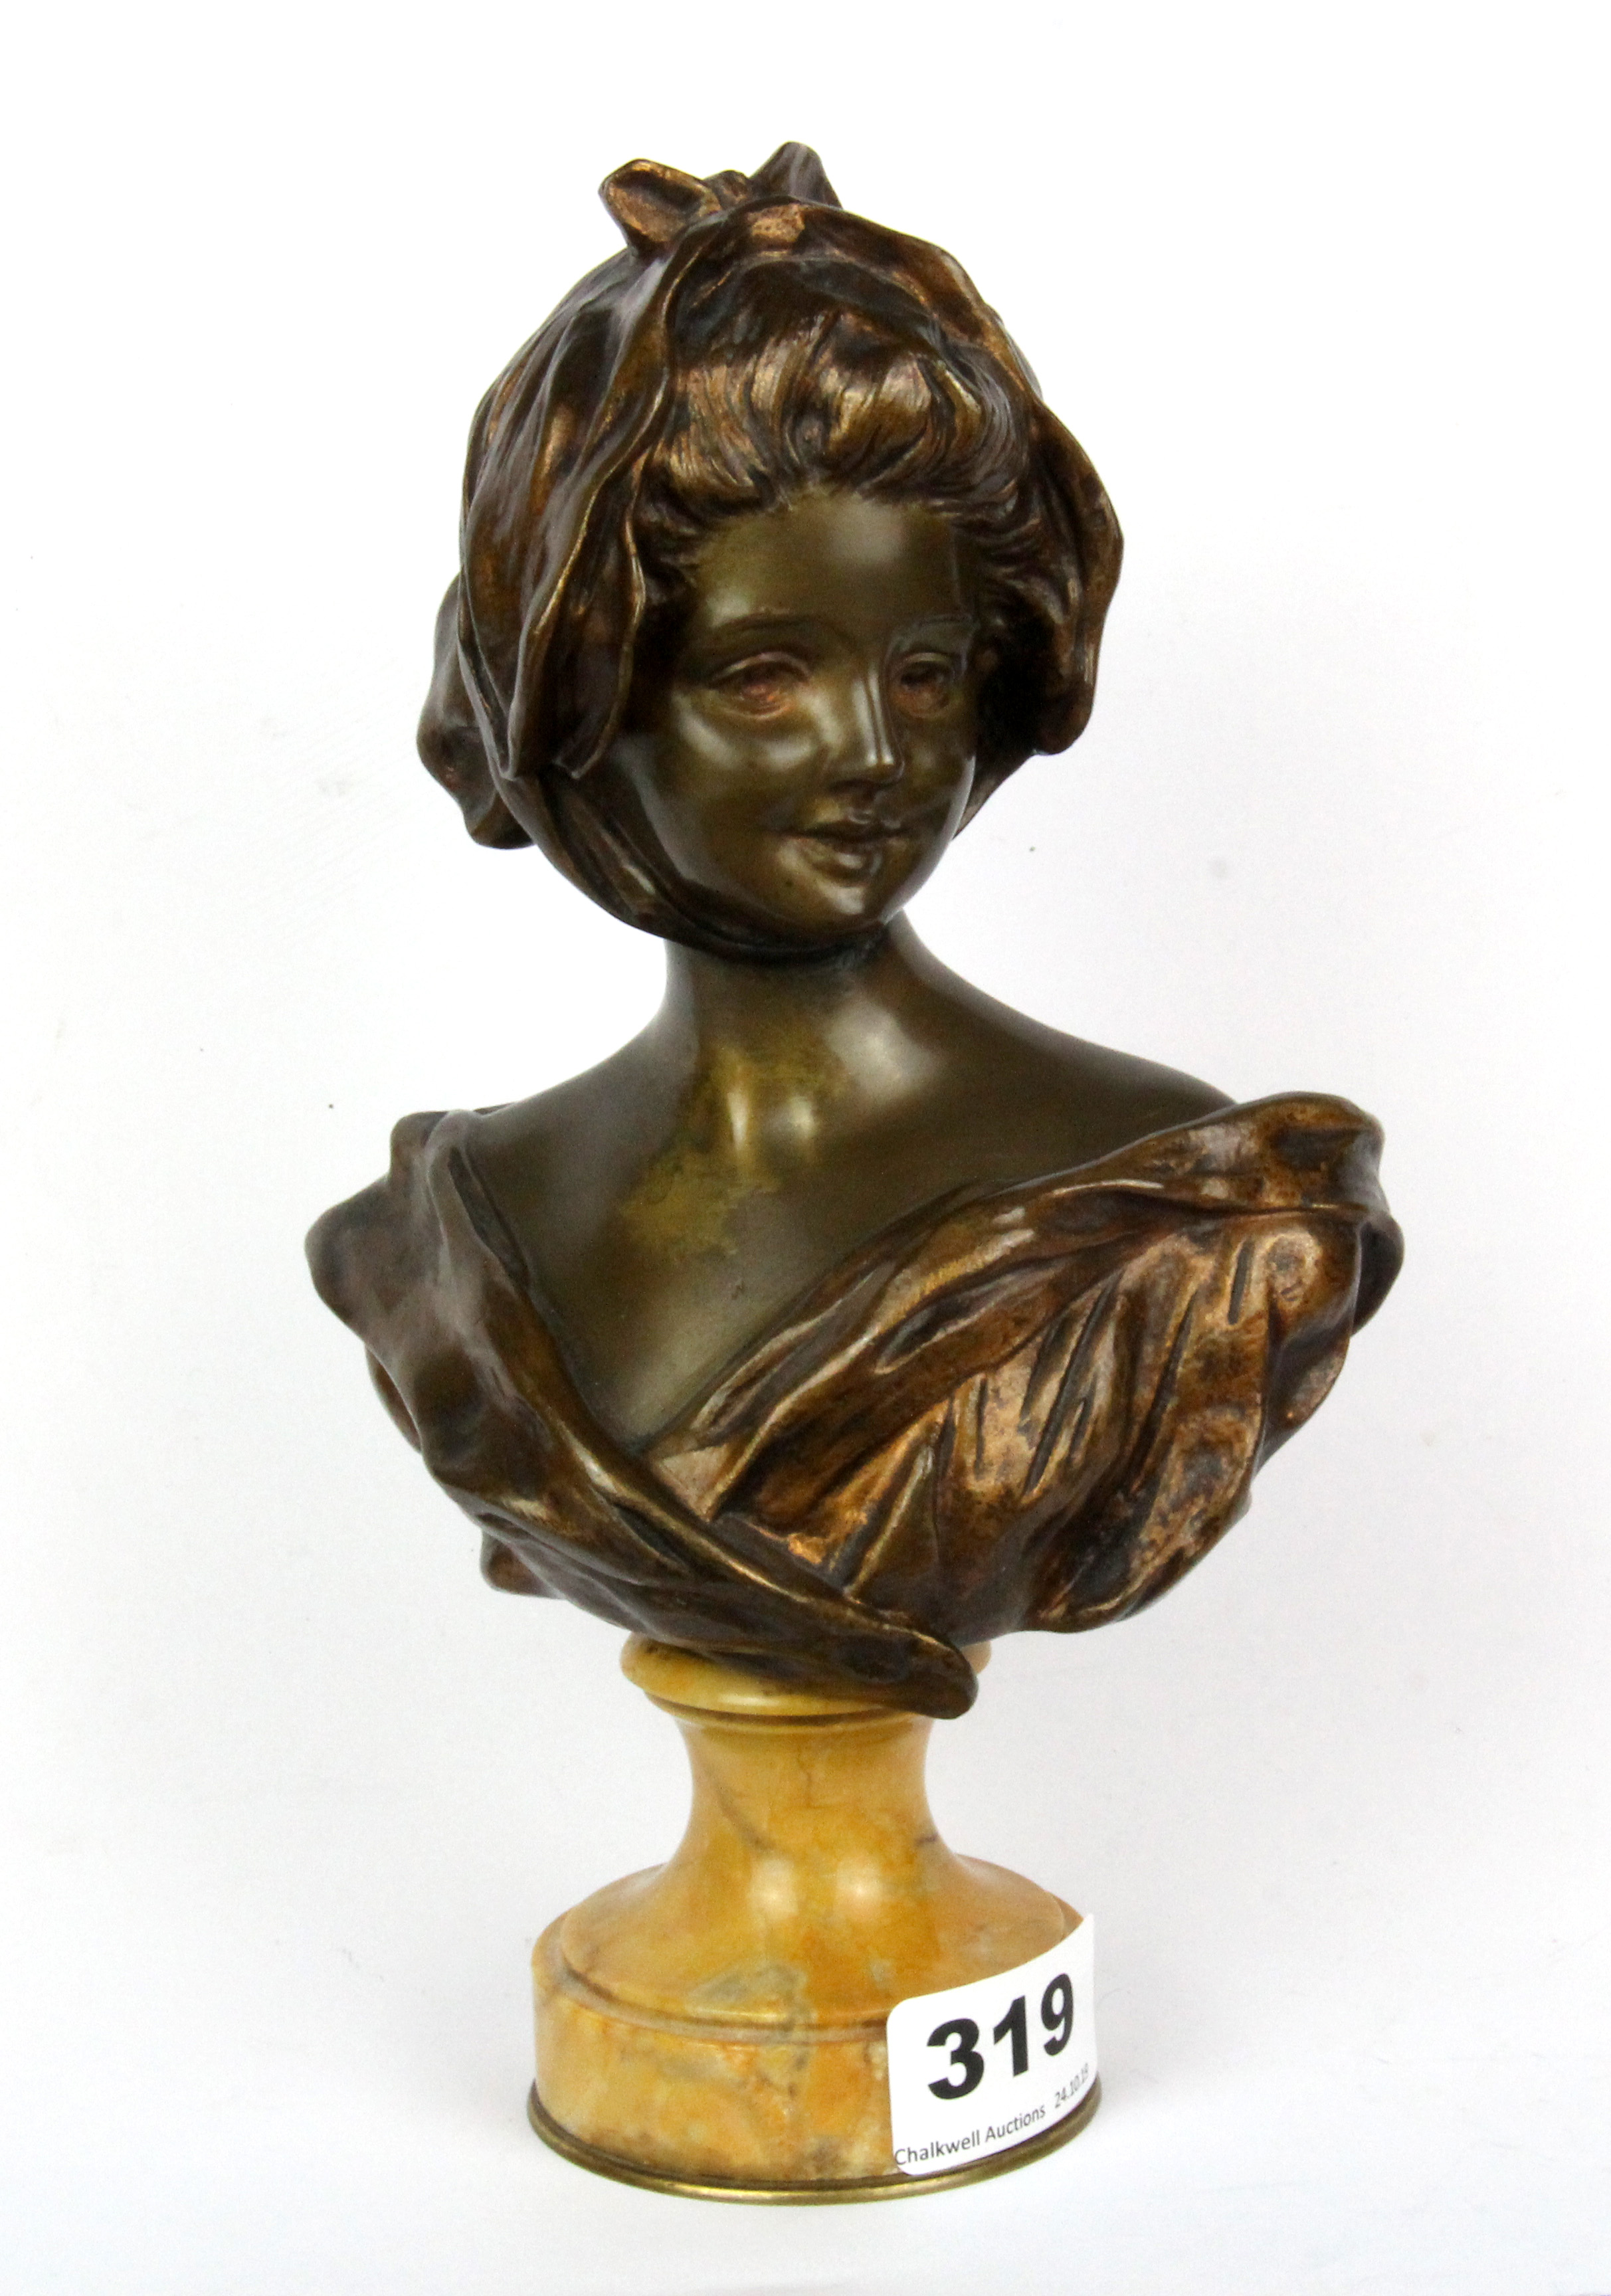 A 19th century signed French bronze Art Nouveau bust of a girl on a turned marble base by Van der